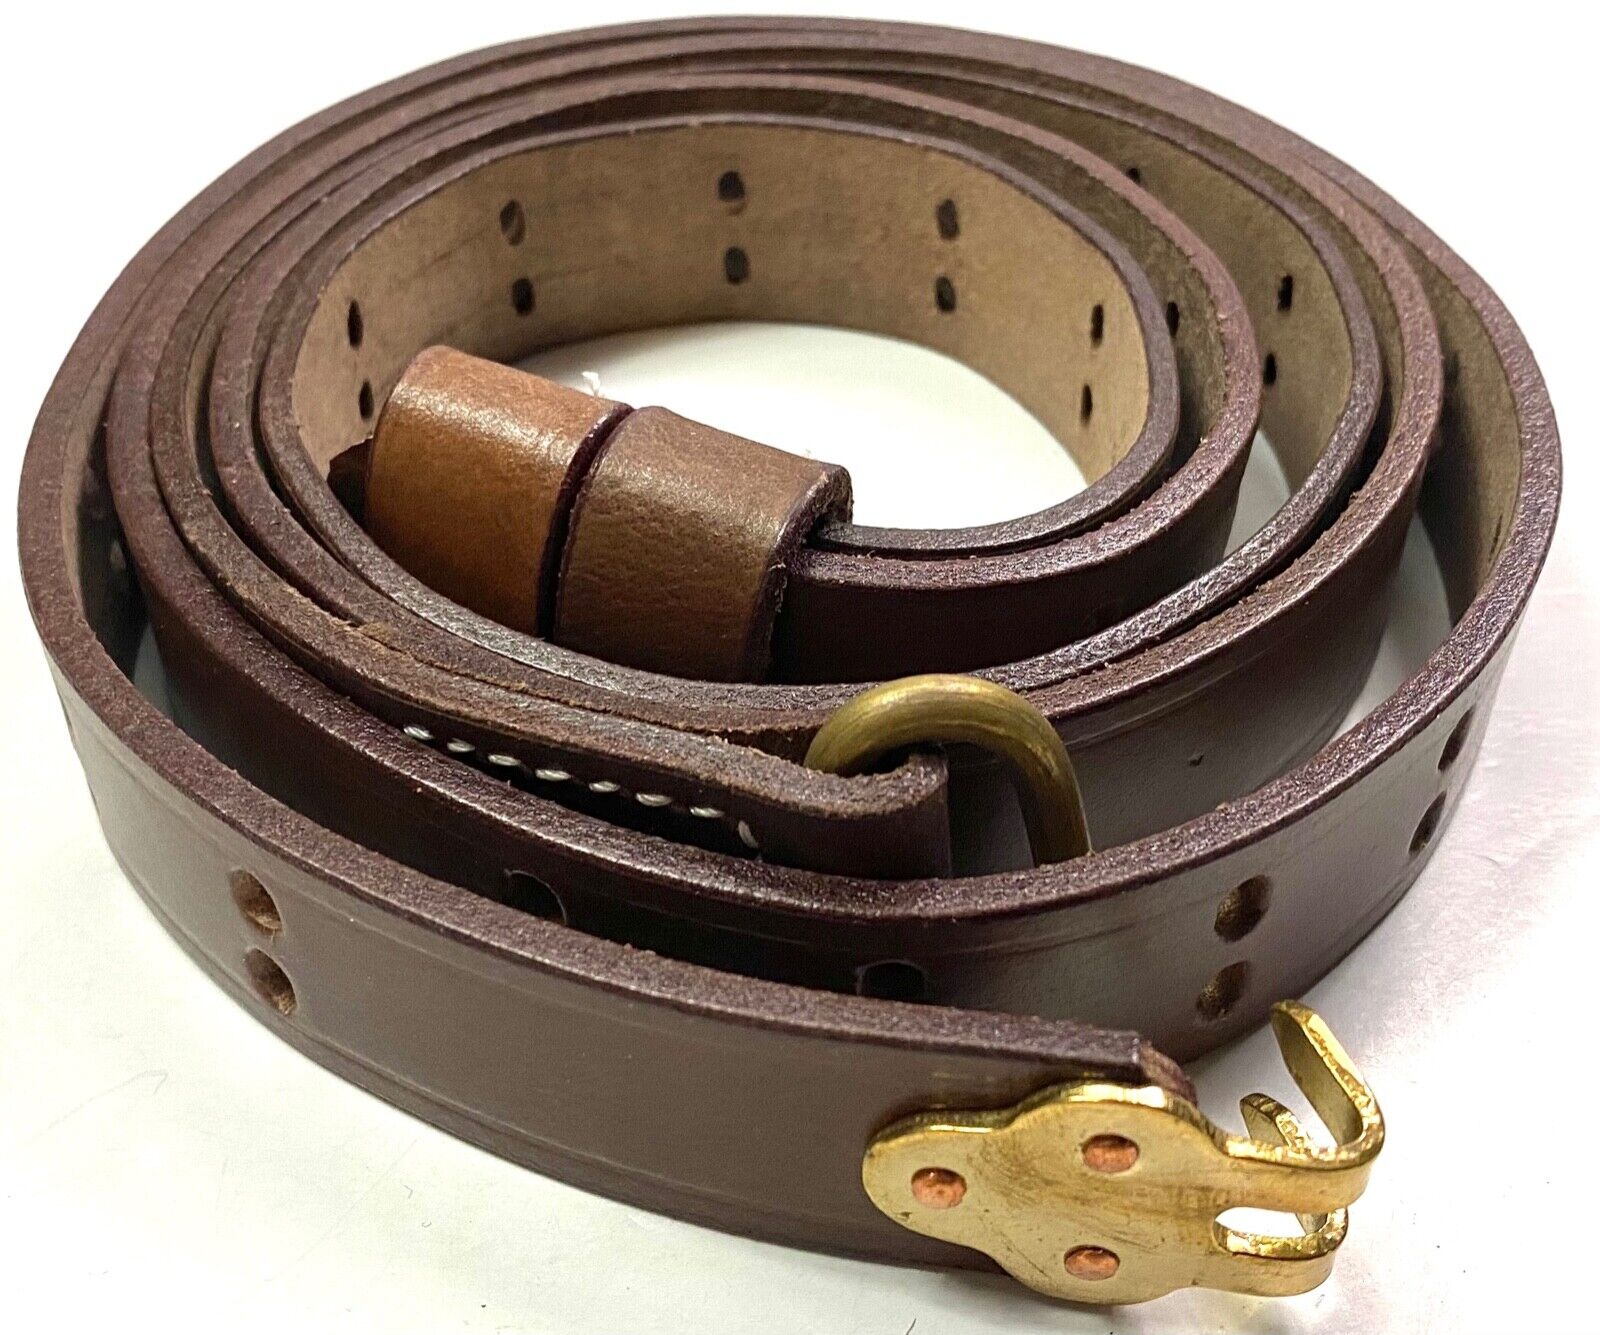 WWII US M1 GARAND RIFLE M1907 LEATHER CARRY SLING- 1 inch